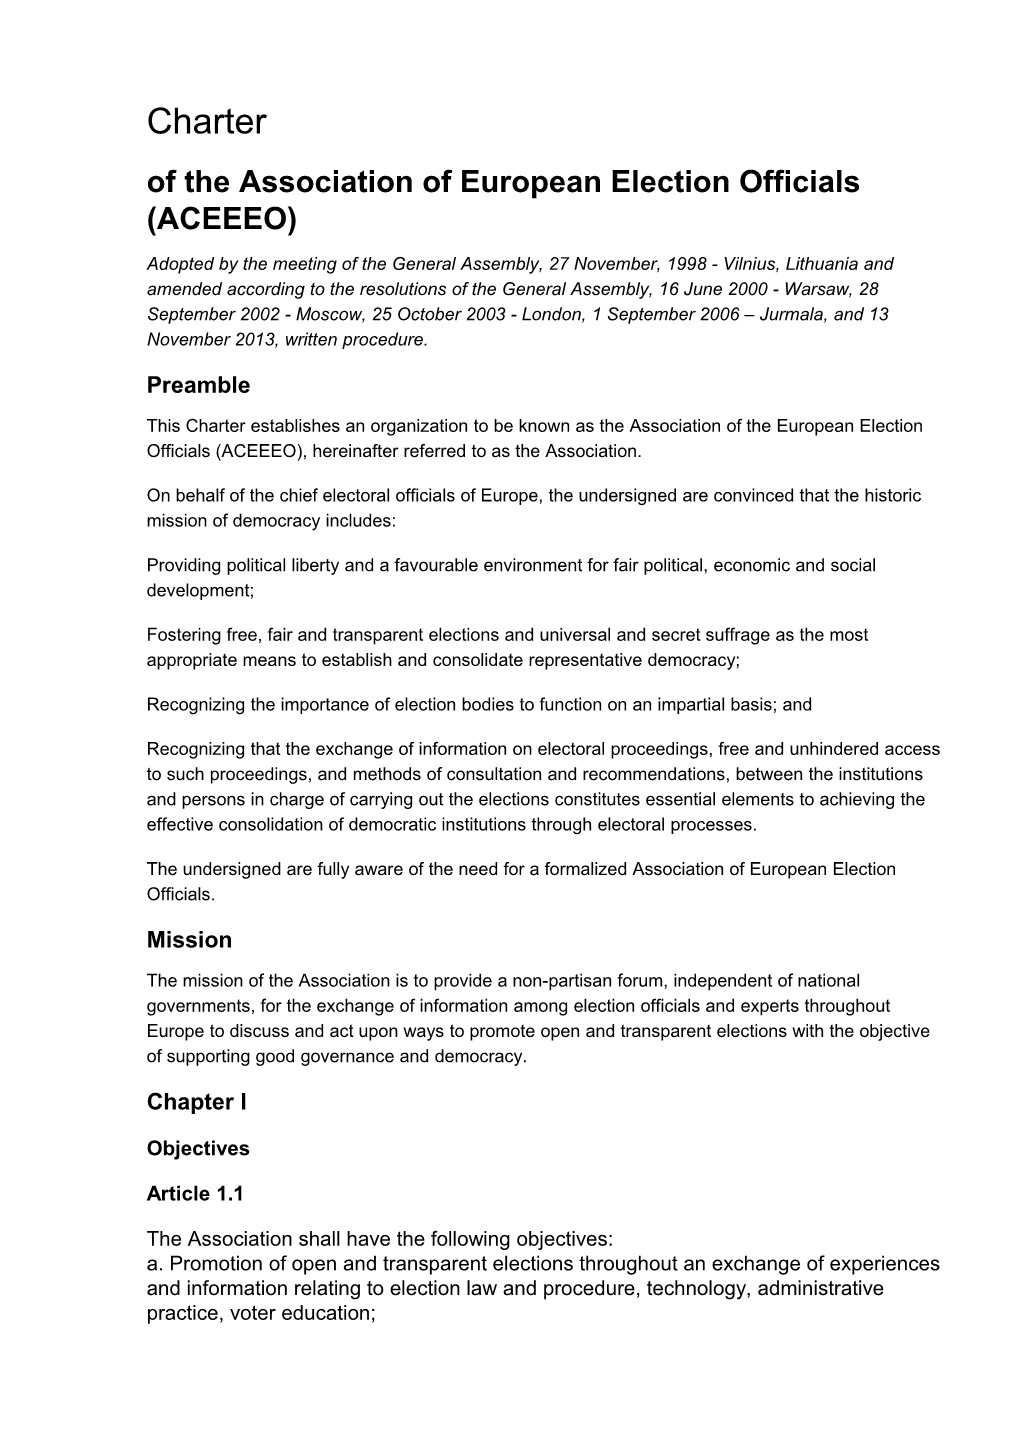 Of the Association of European Election Officials (ACEEEO)